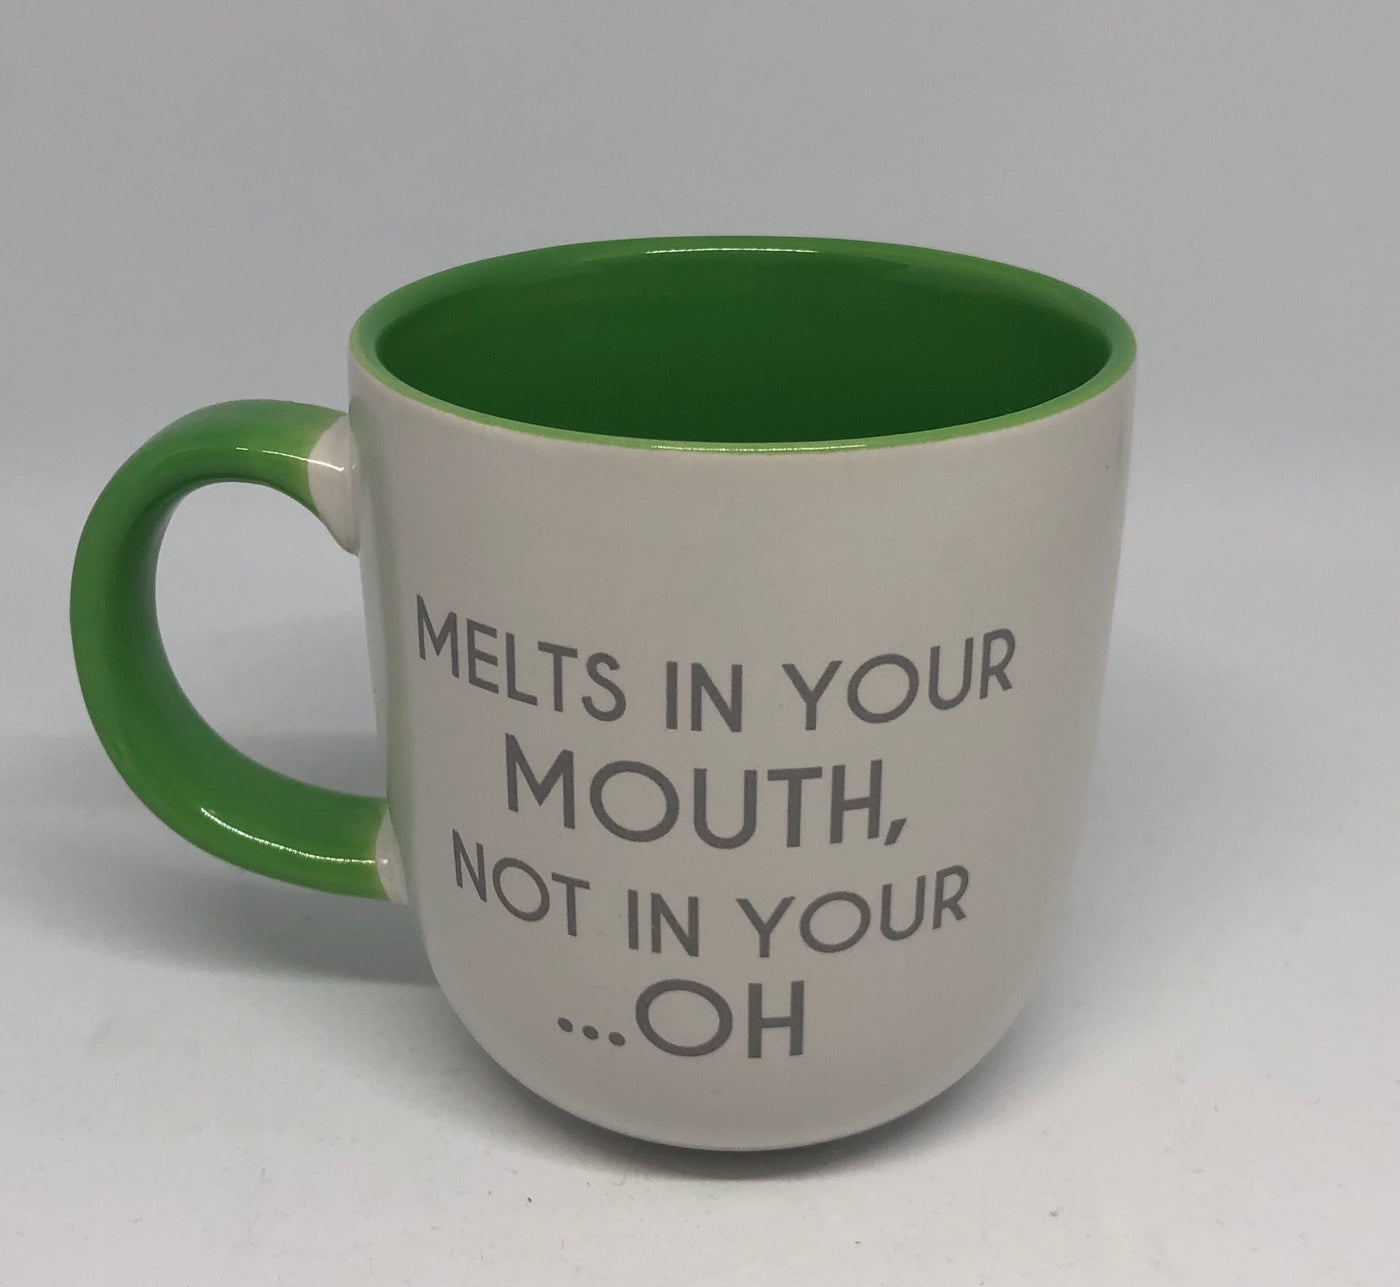 M&M's World Melts in Your Mouth Not in Your ...Oh Ceramic Coffee Mug N ...